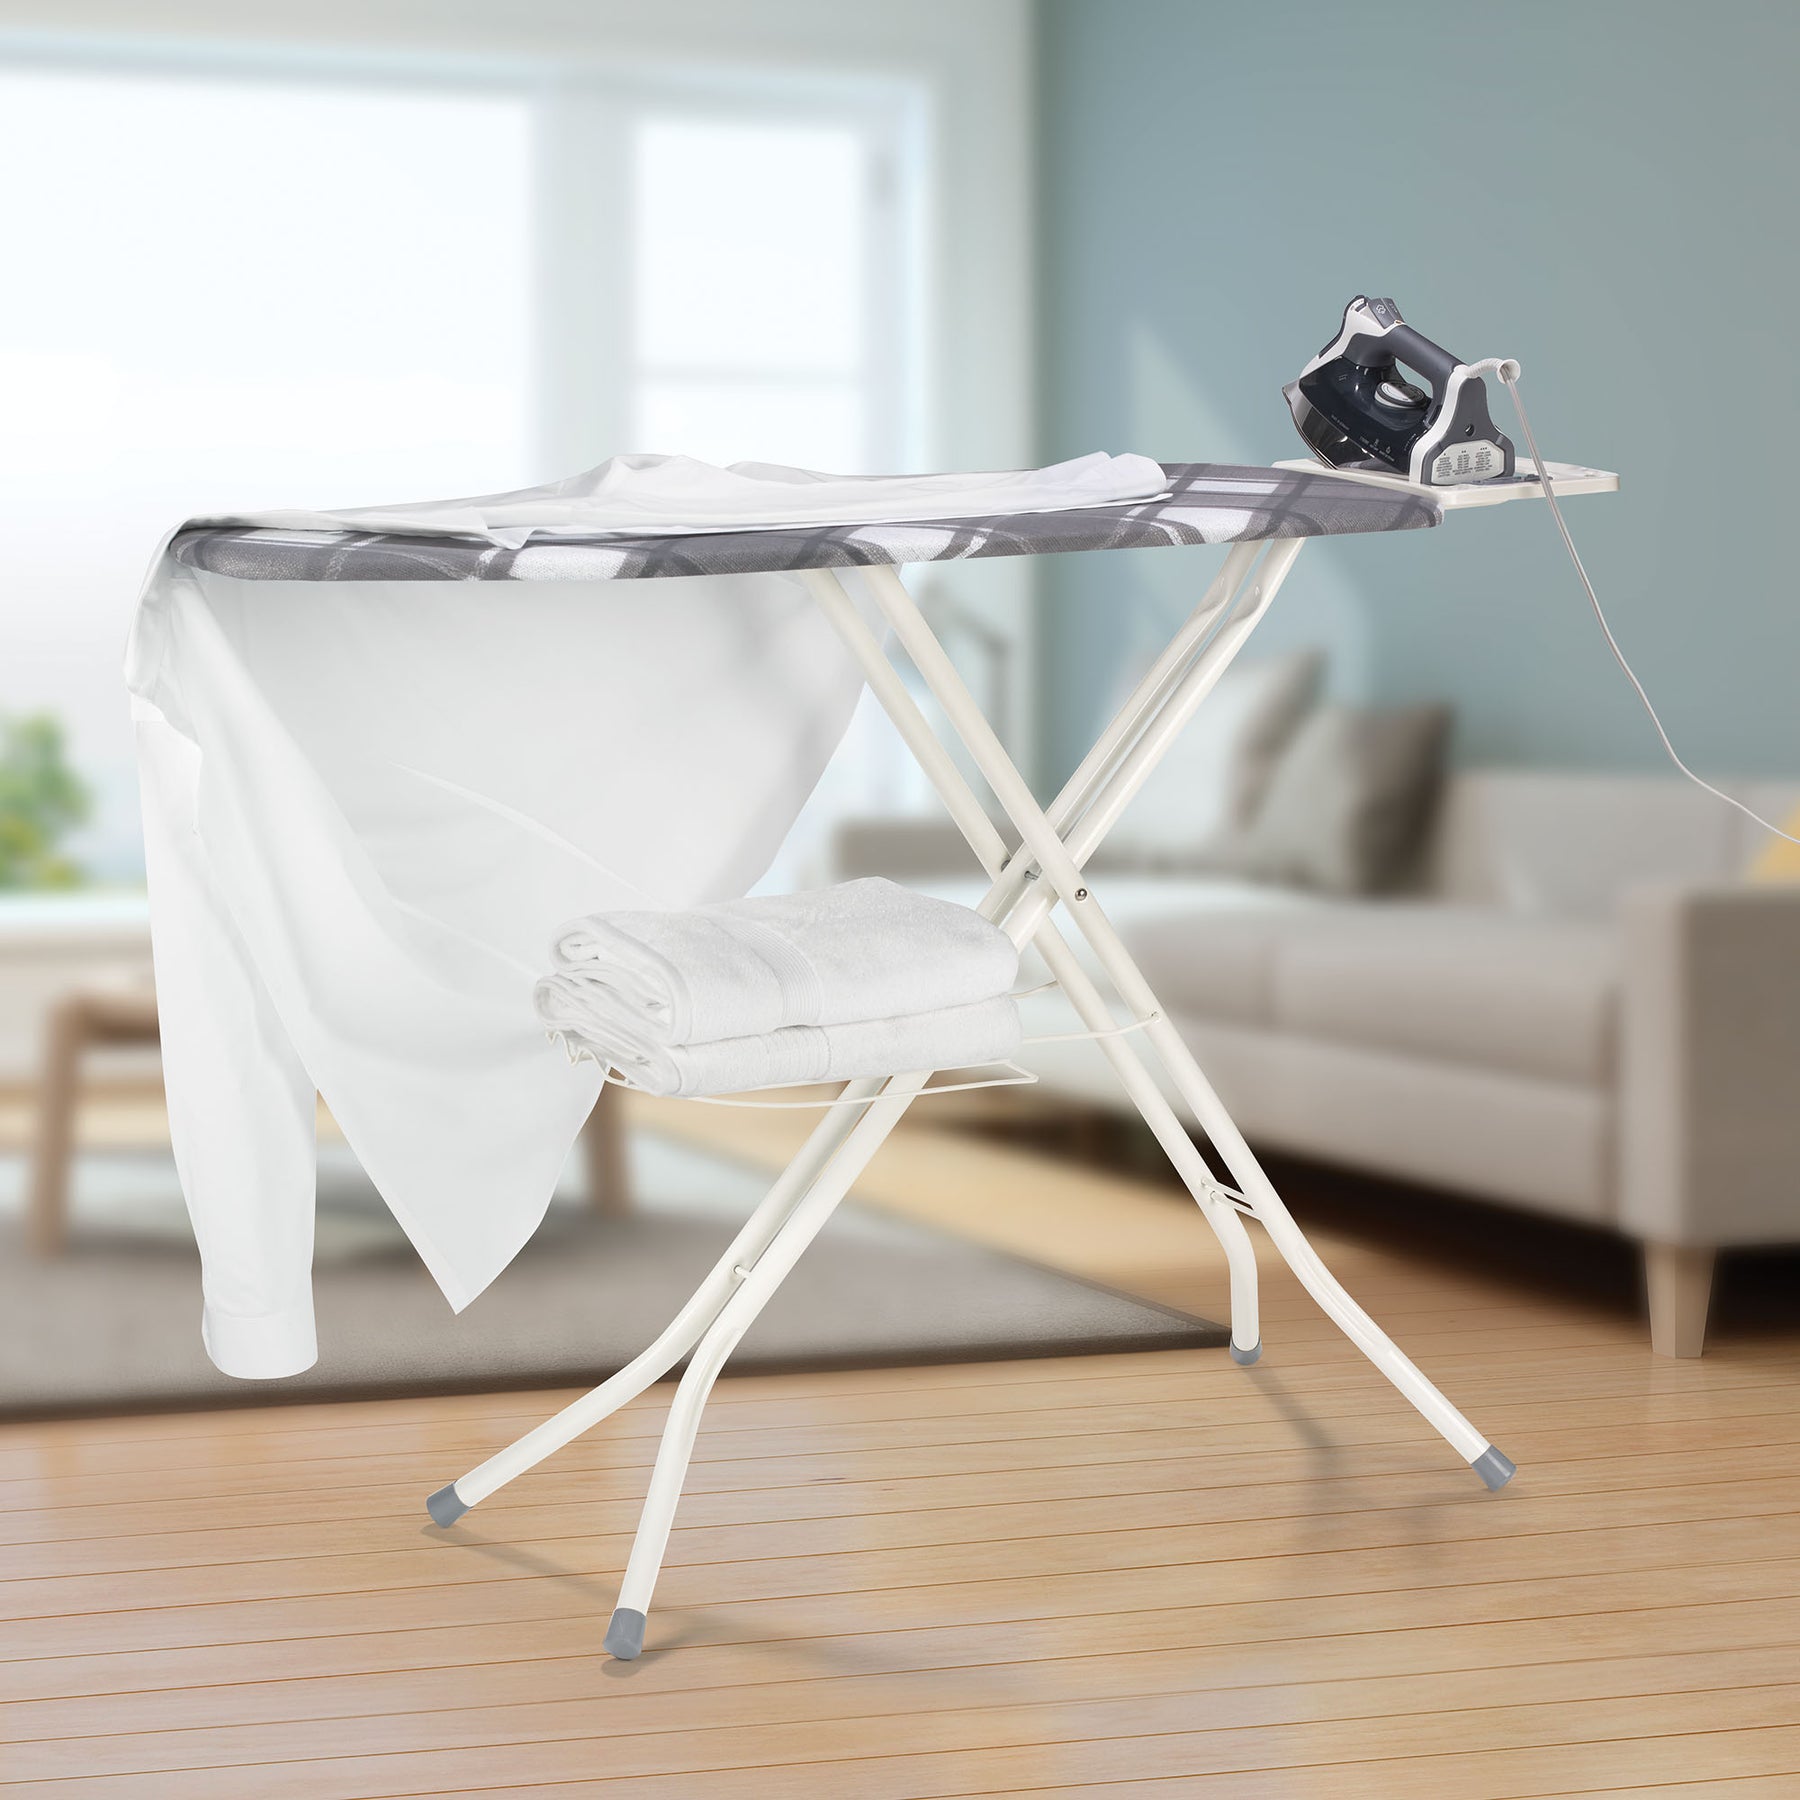 48 x 15 Deluxe Ironing Station – Polder Products